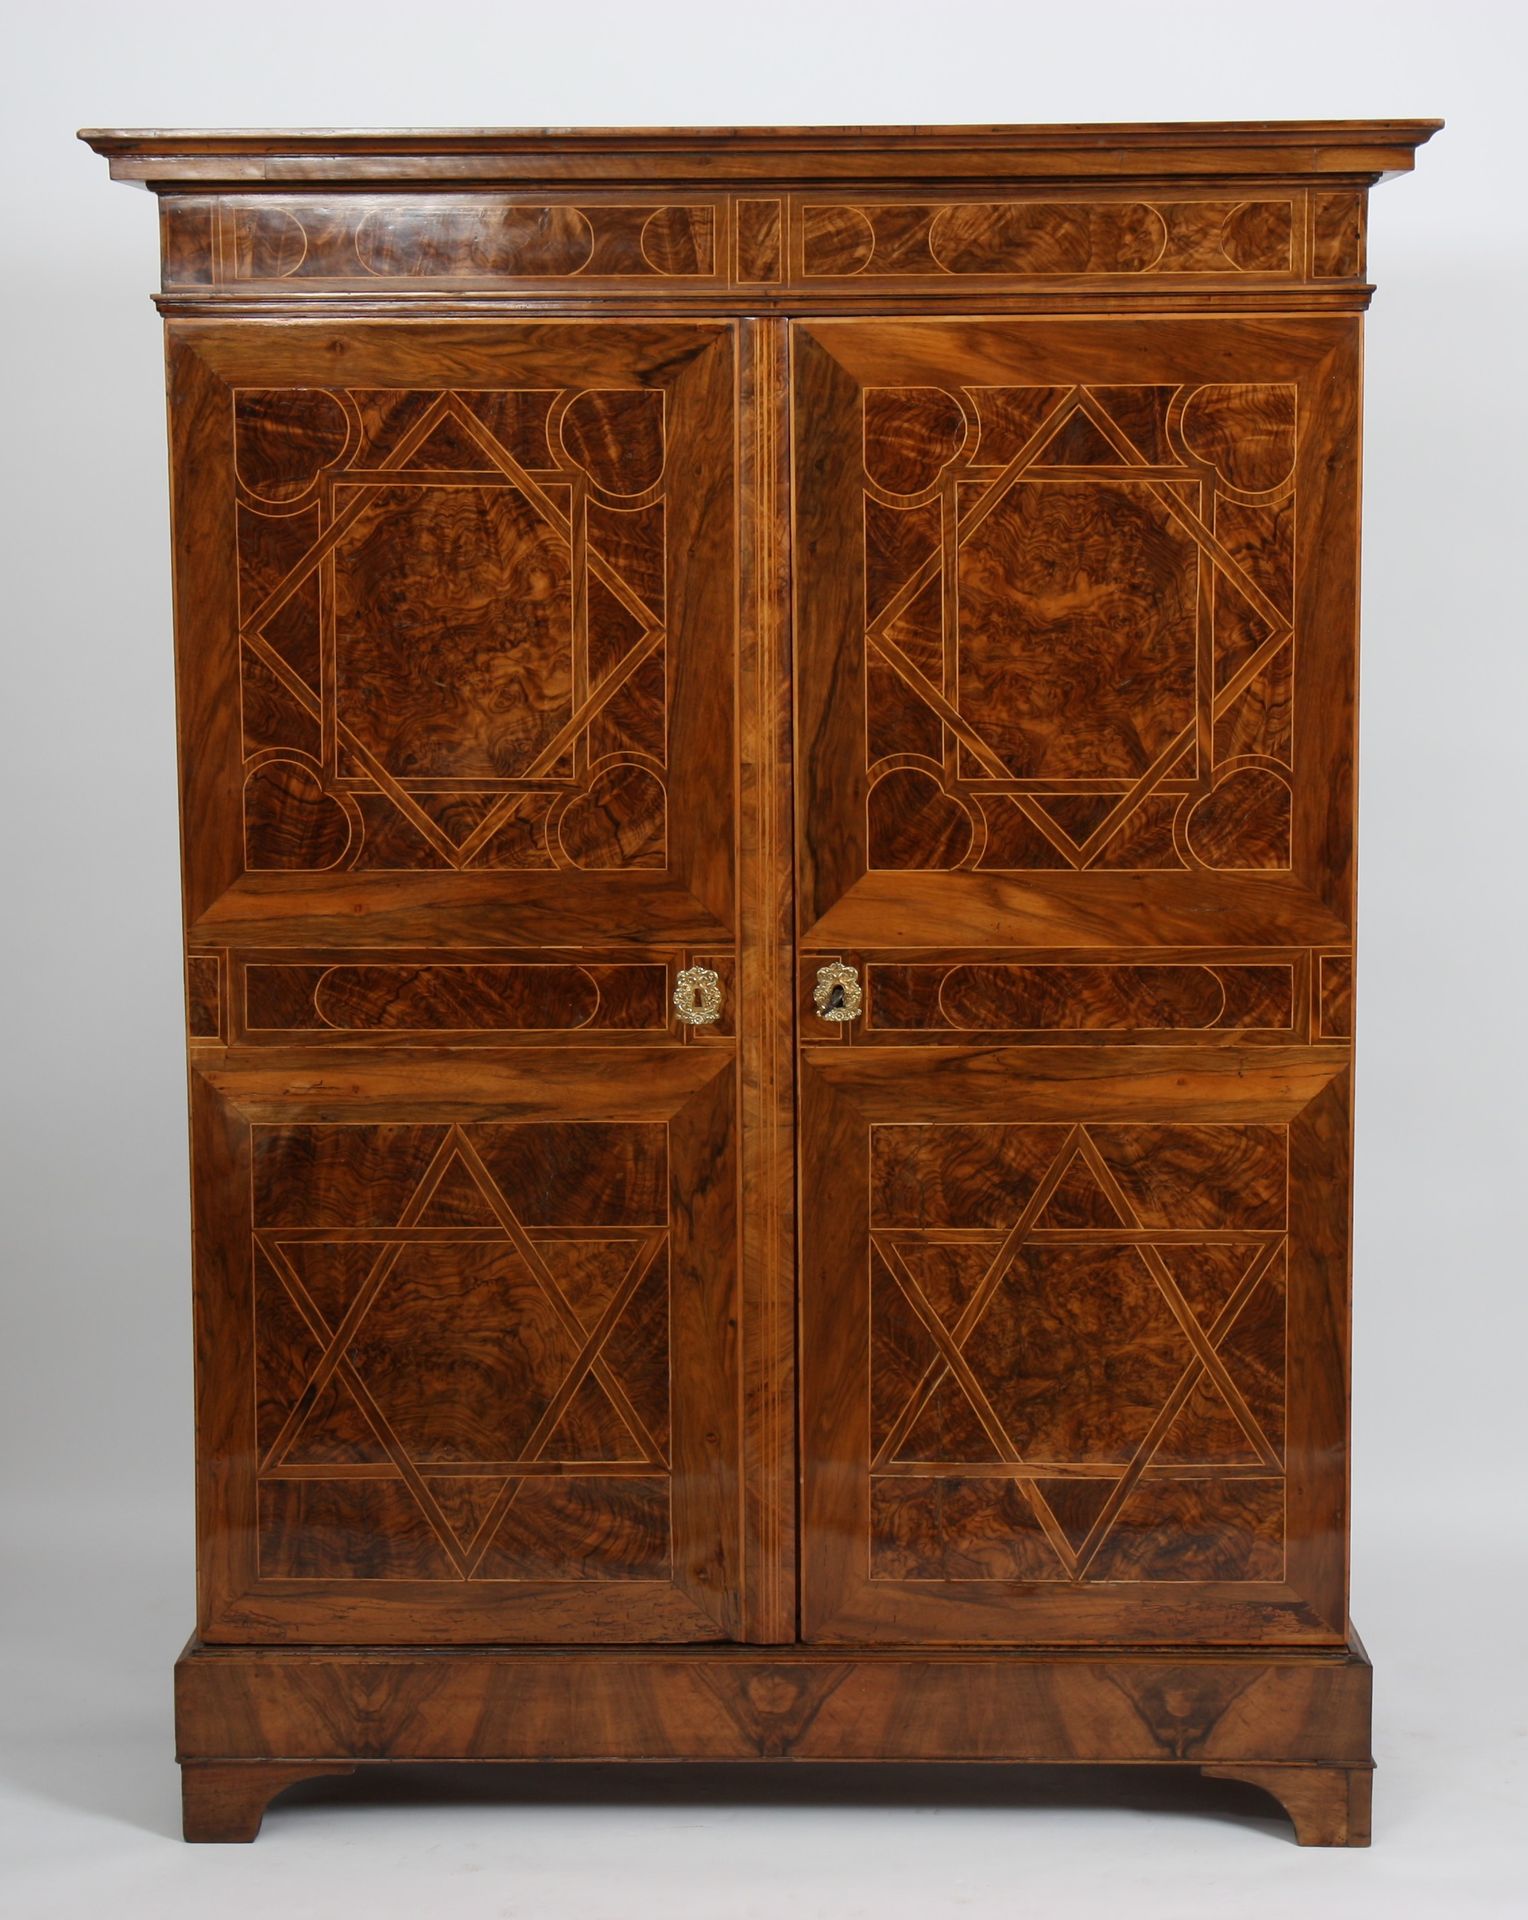 Null RARE INLAID CABINET LOUIS XIV

In walnut and walnut burl veneer, decorated &hellip;